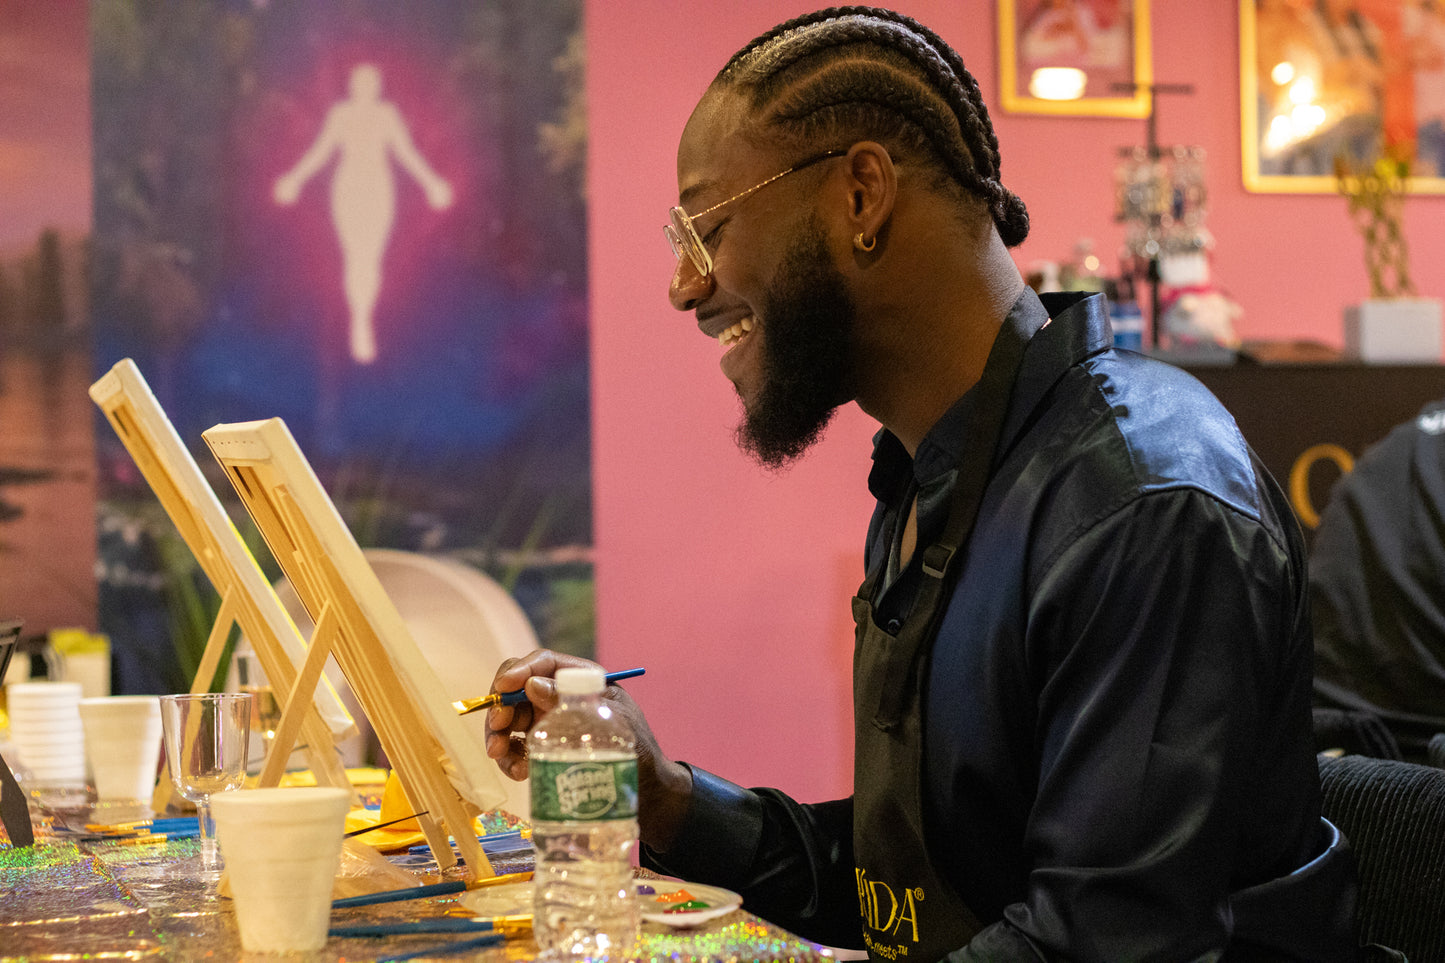 Private Sip & Paint Party